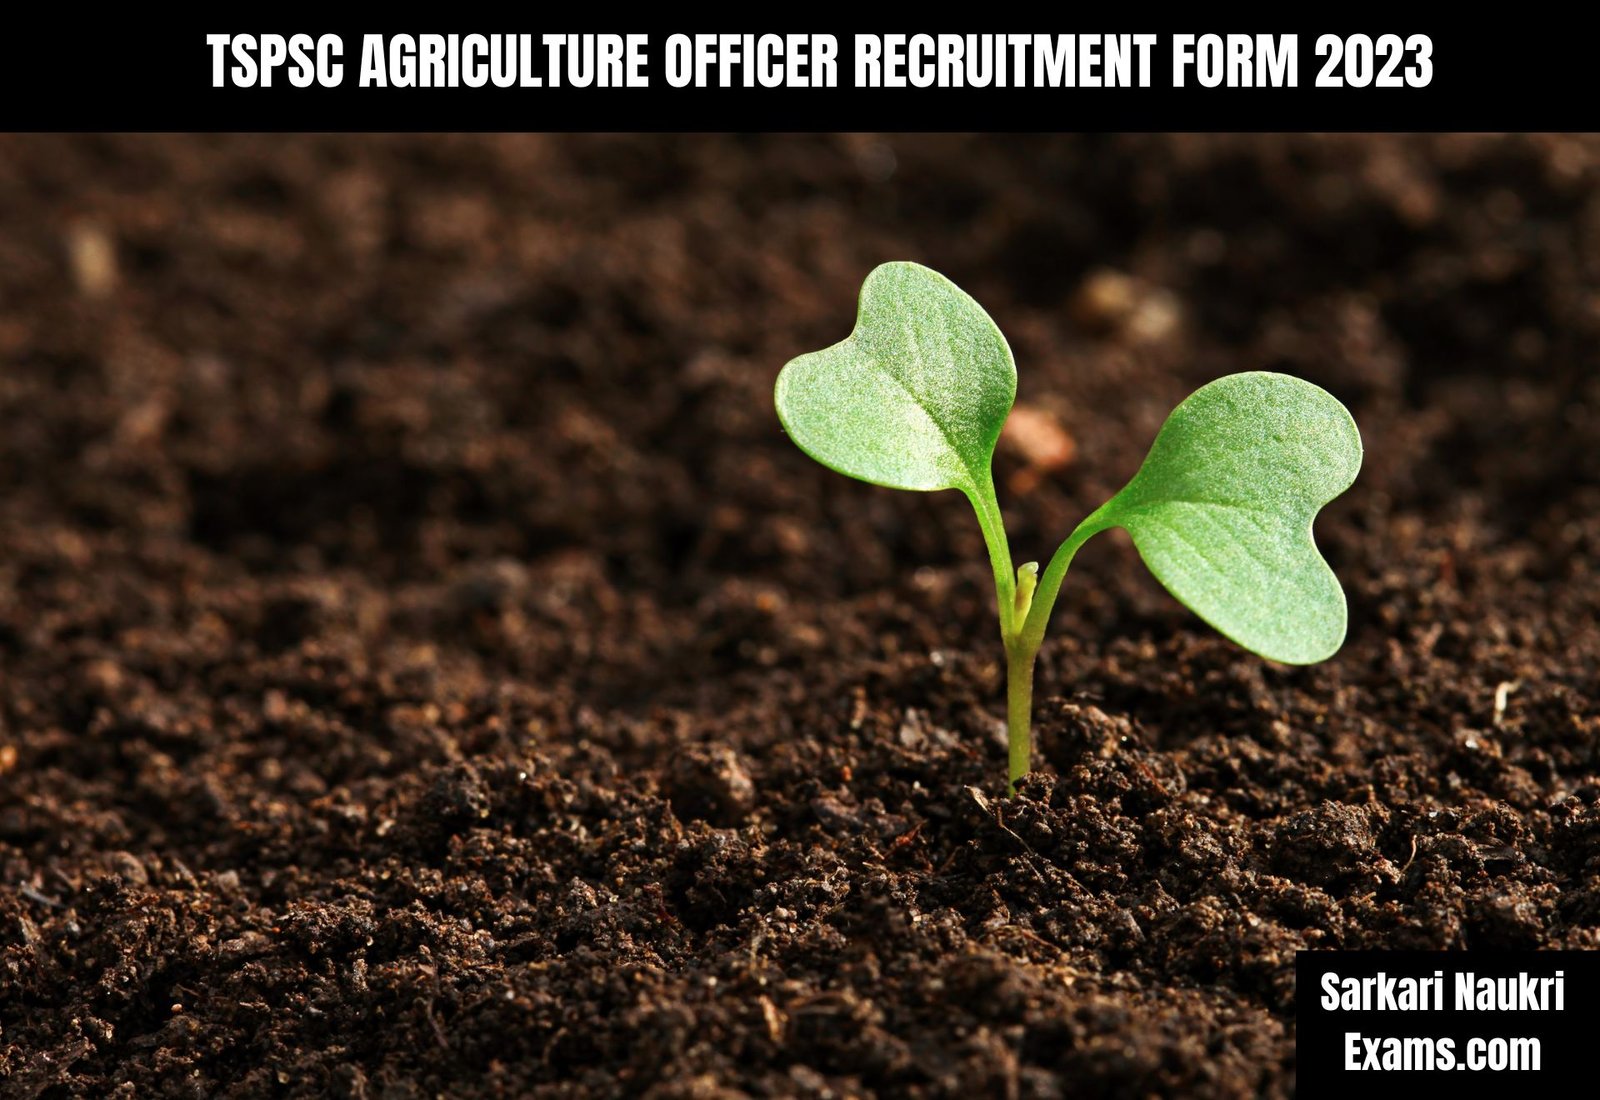 TSPSC Agriculture Officer Recruitment Form 2023 | Salary Up To 127310/-